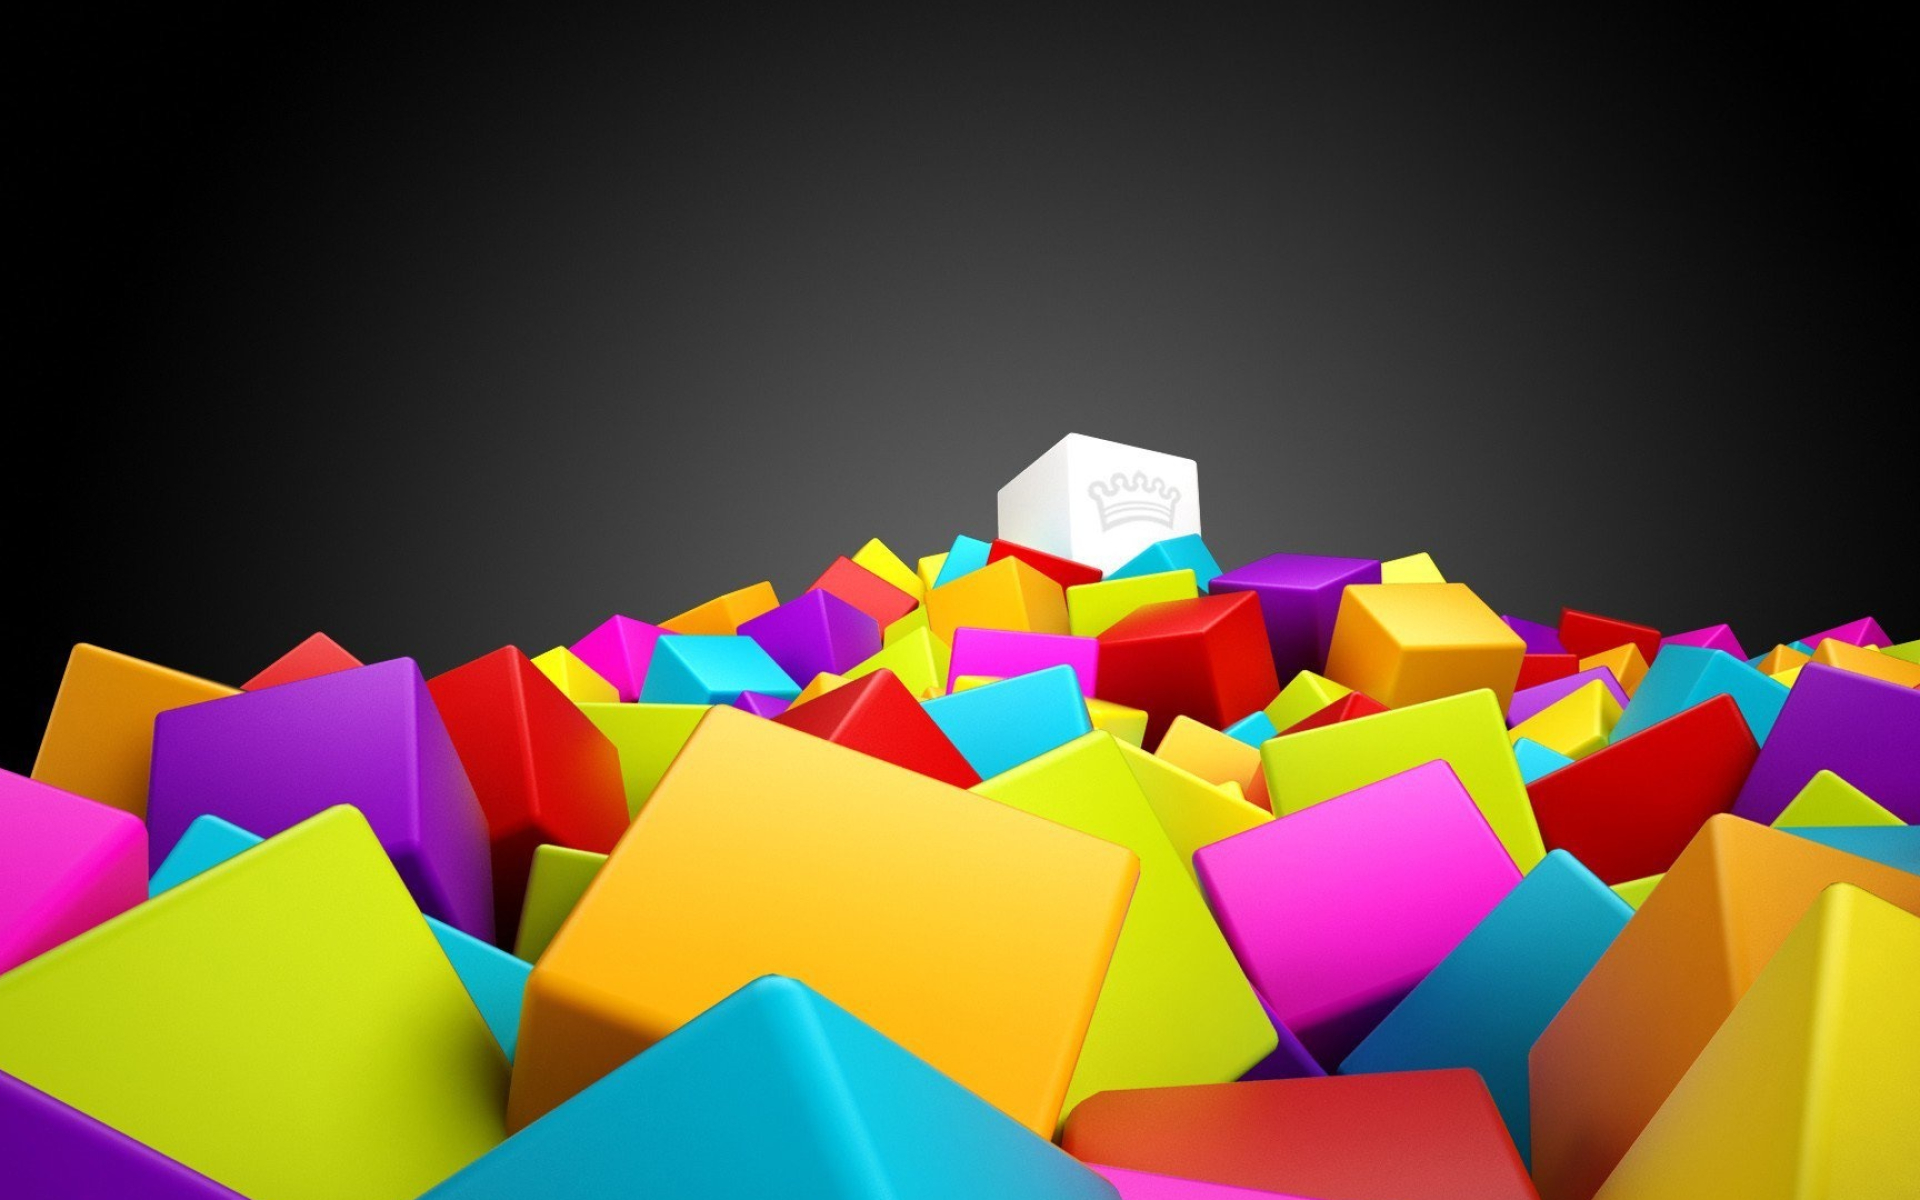 3D Cubes, Modern design, Futuristic elements, Abstract patterns, Complexity and depth, 1920x1200 HD Desktop